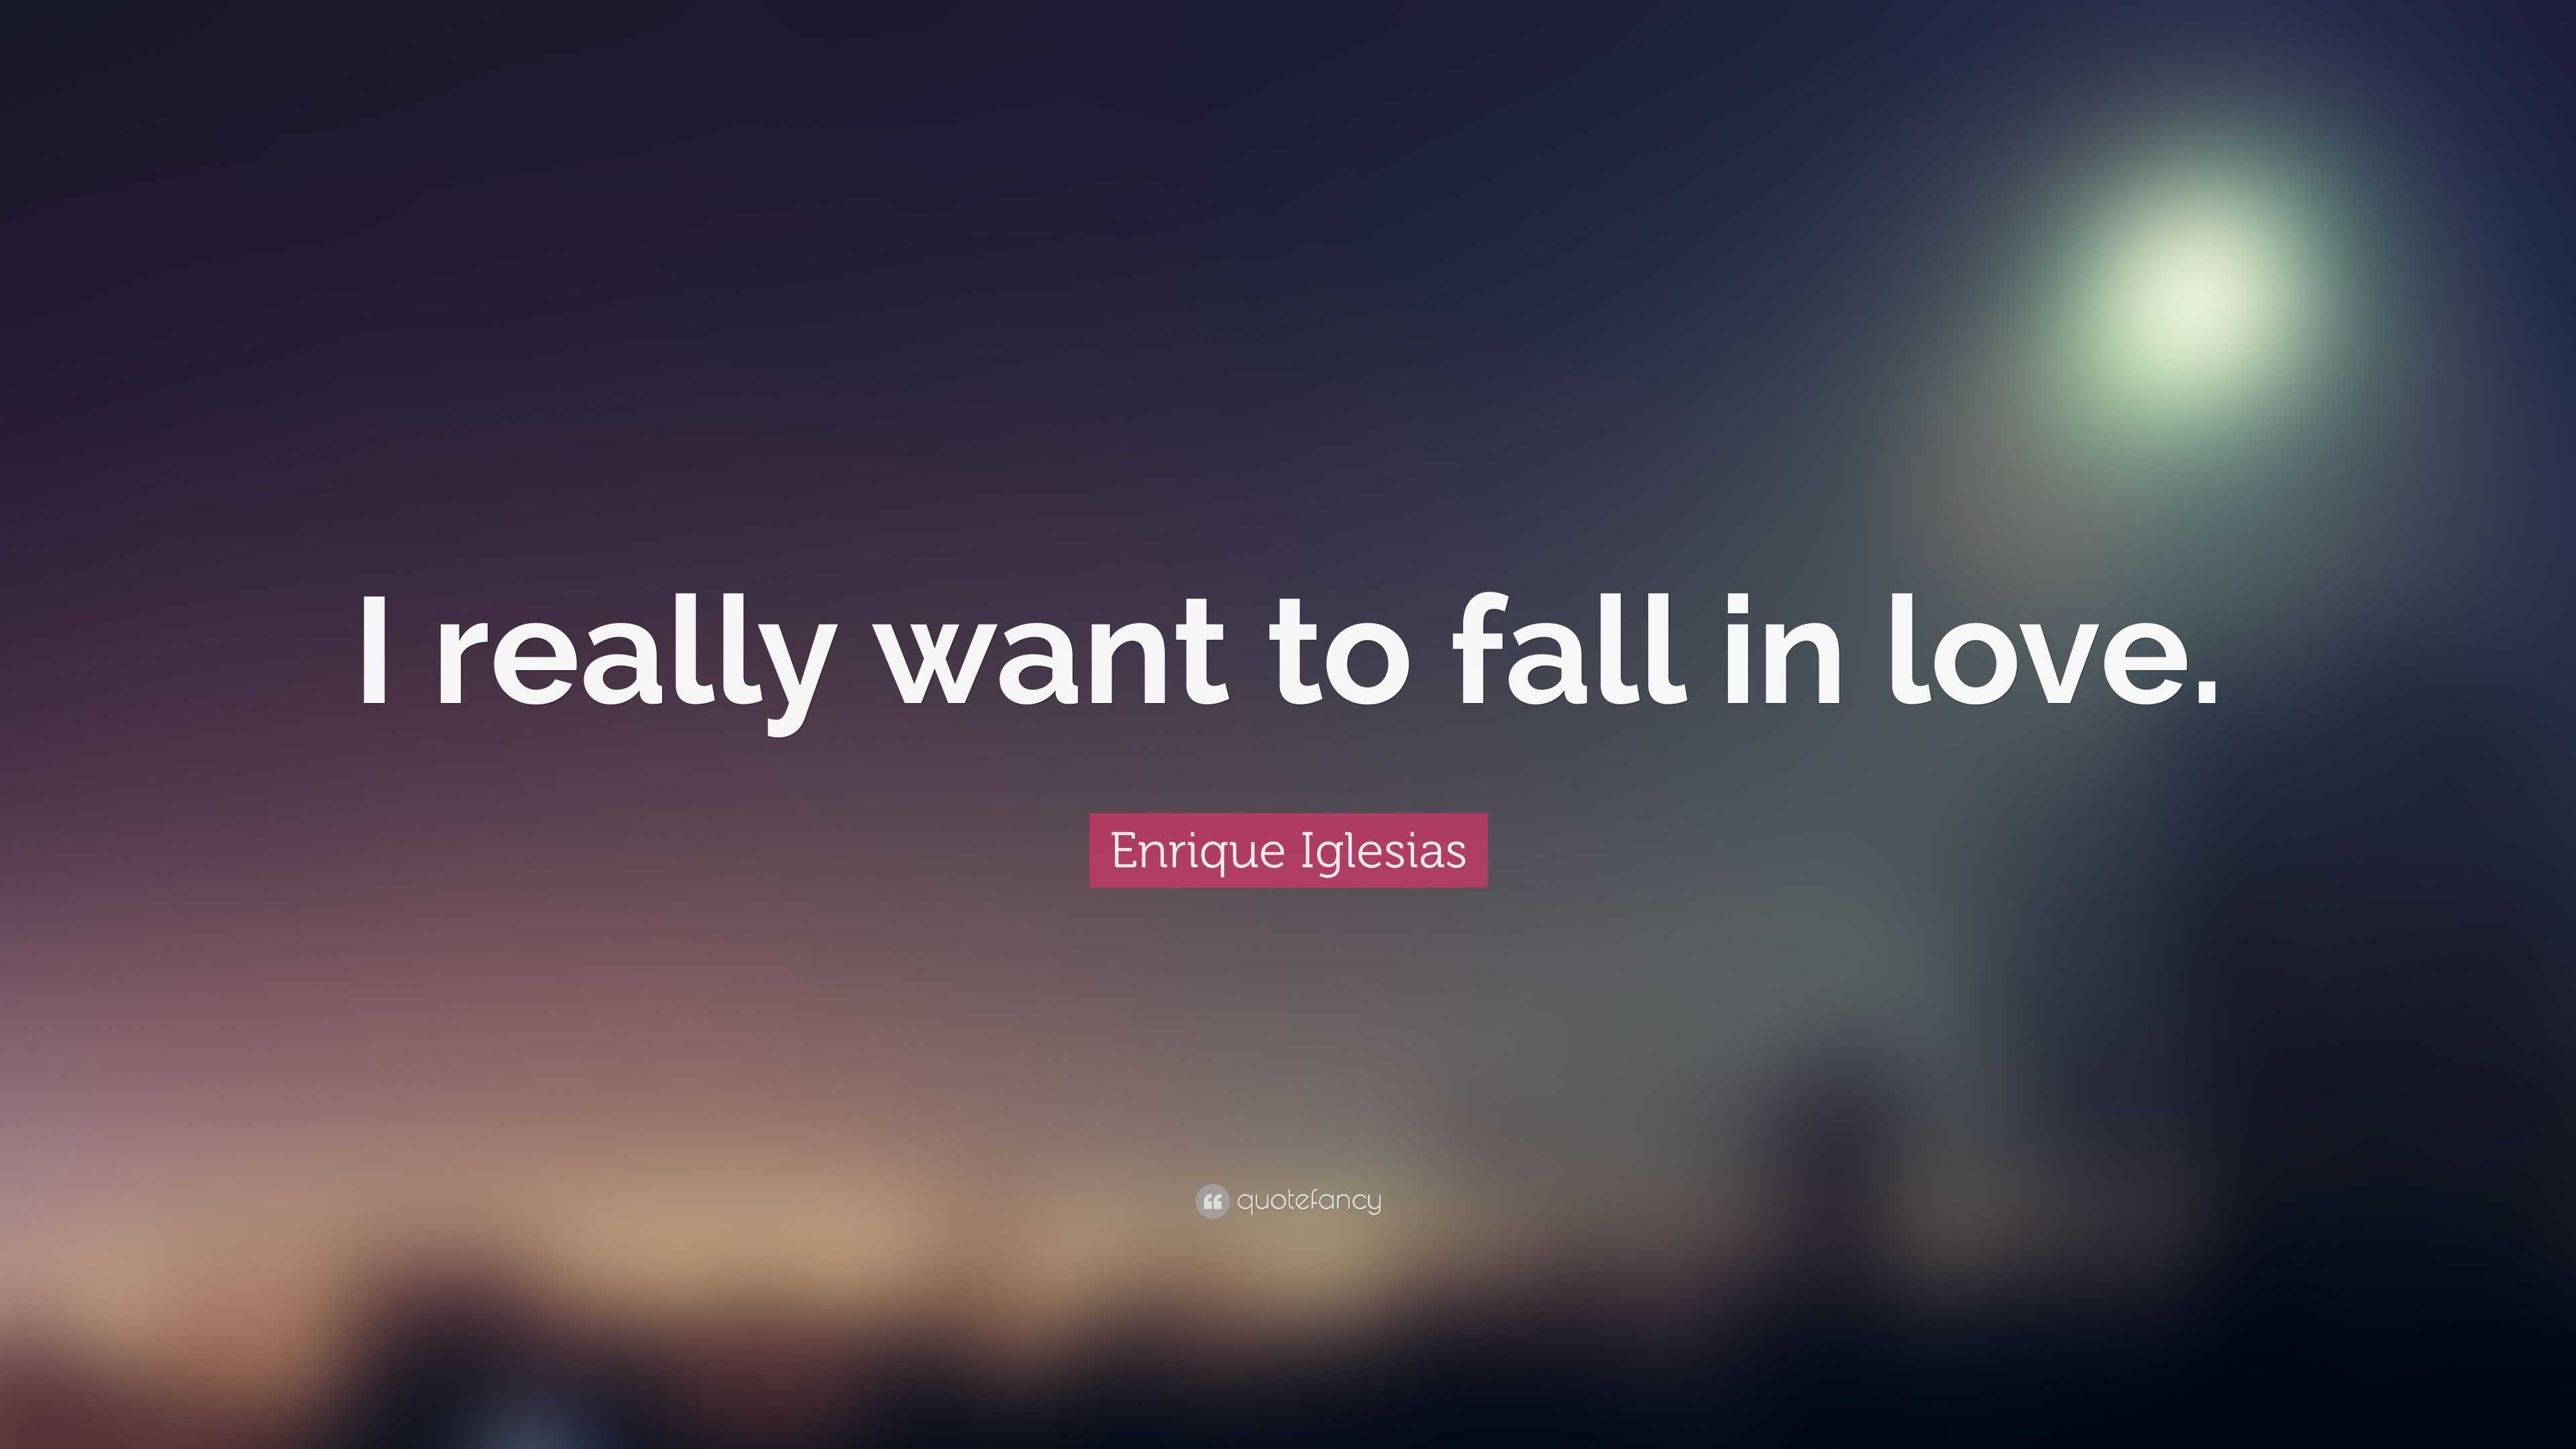 Enrique Iglesias Quote “I really want to fall in love ”